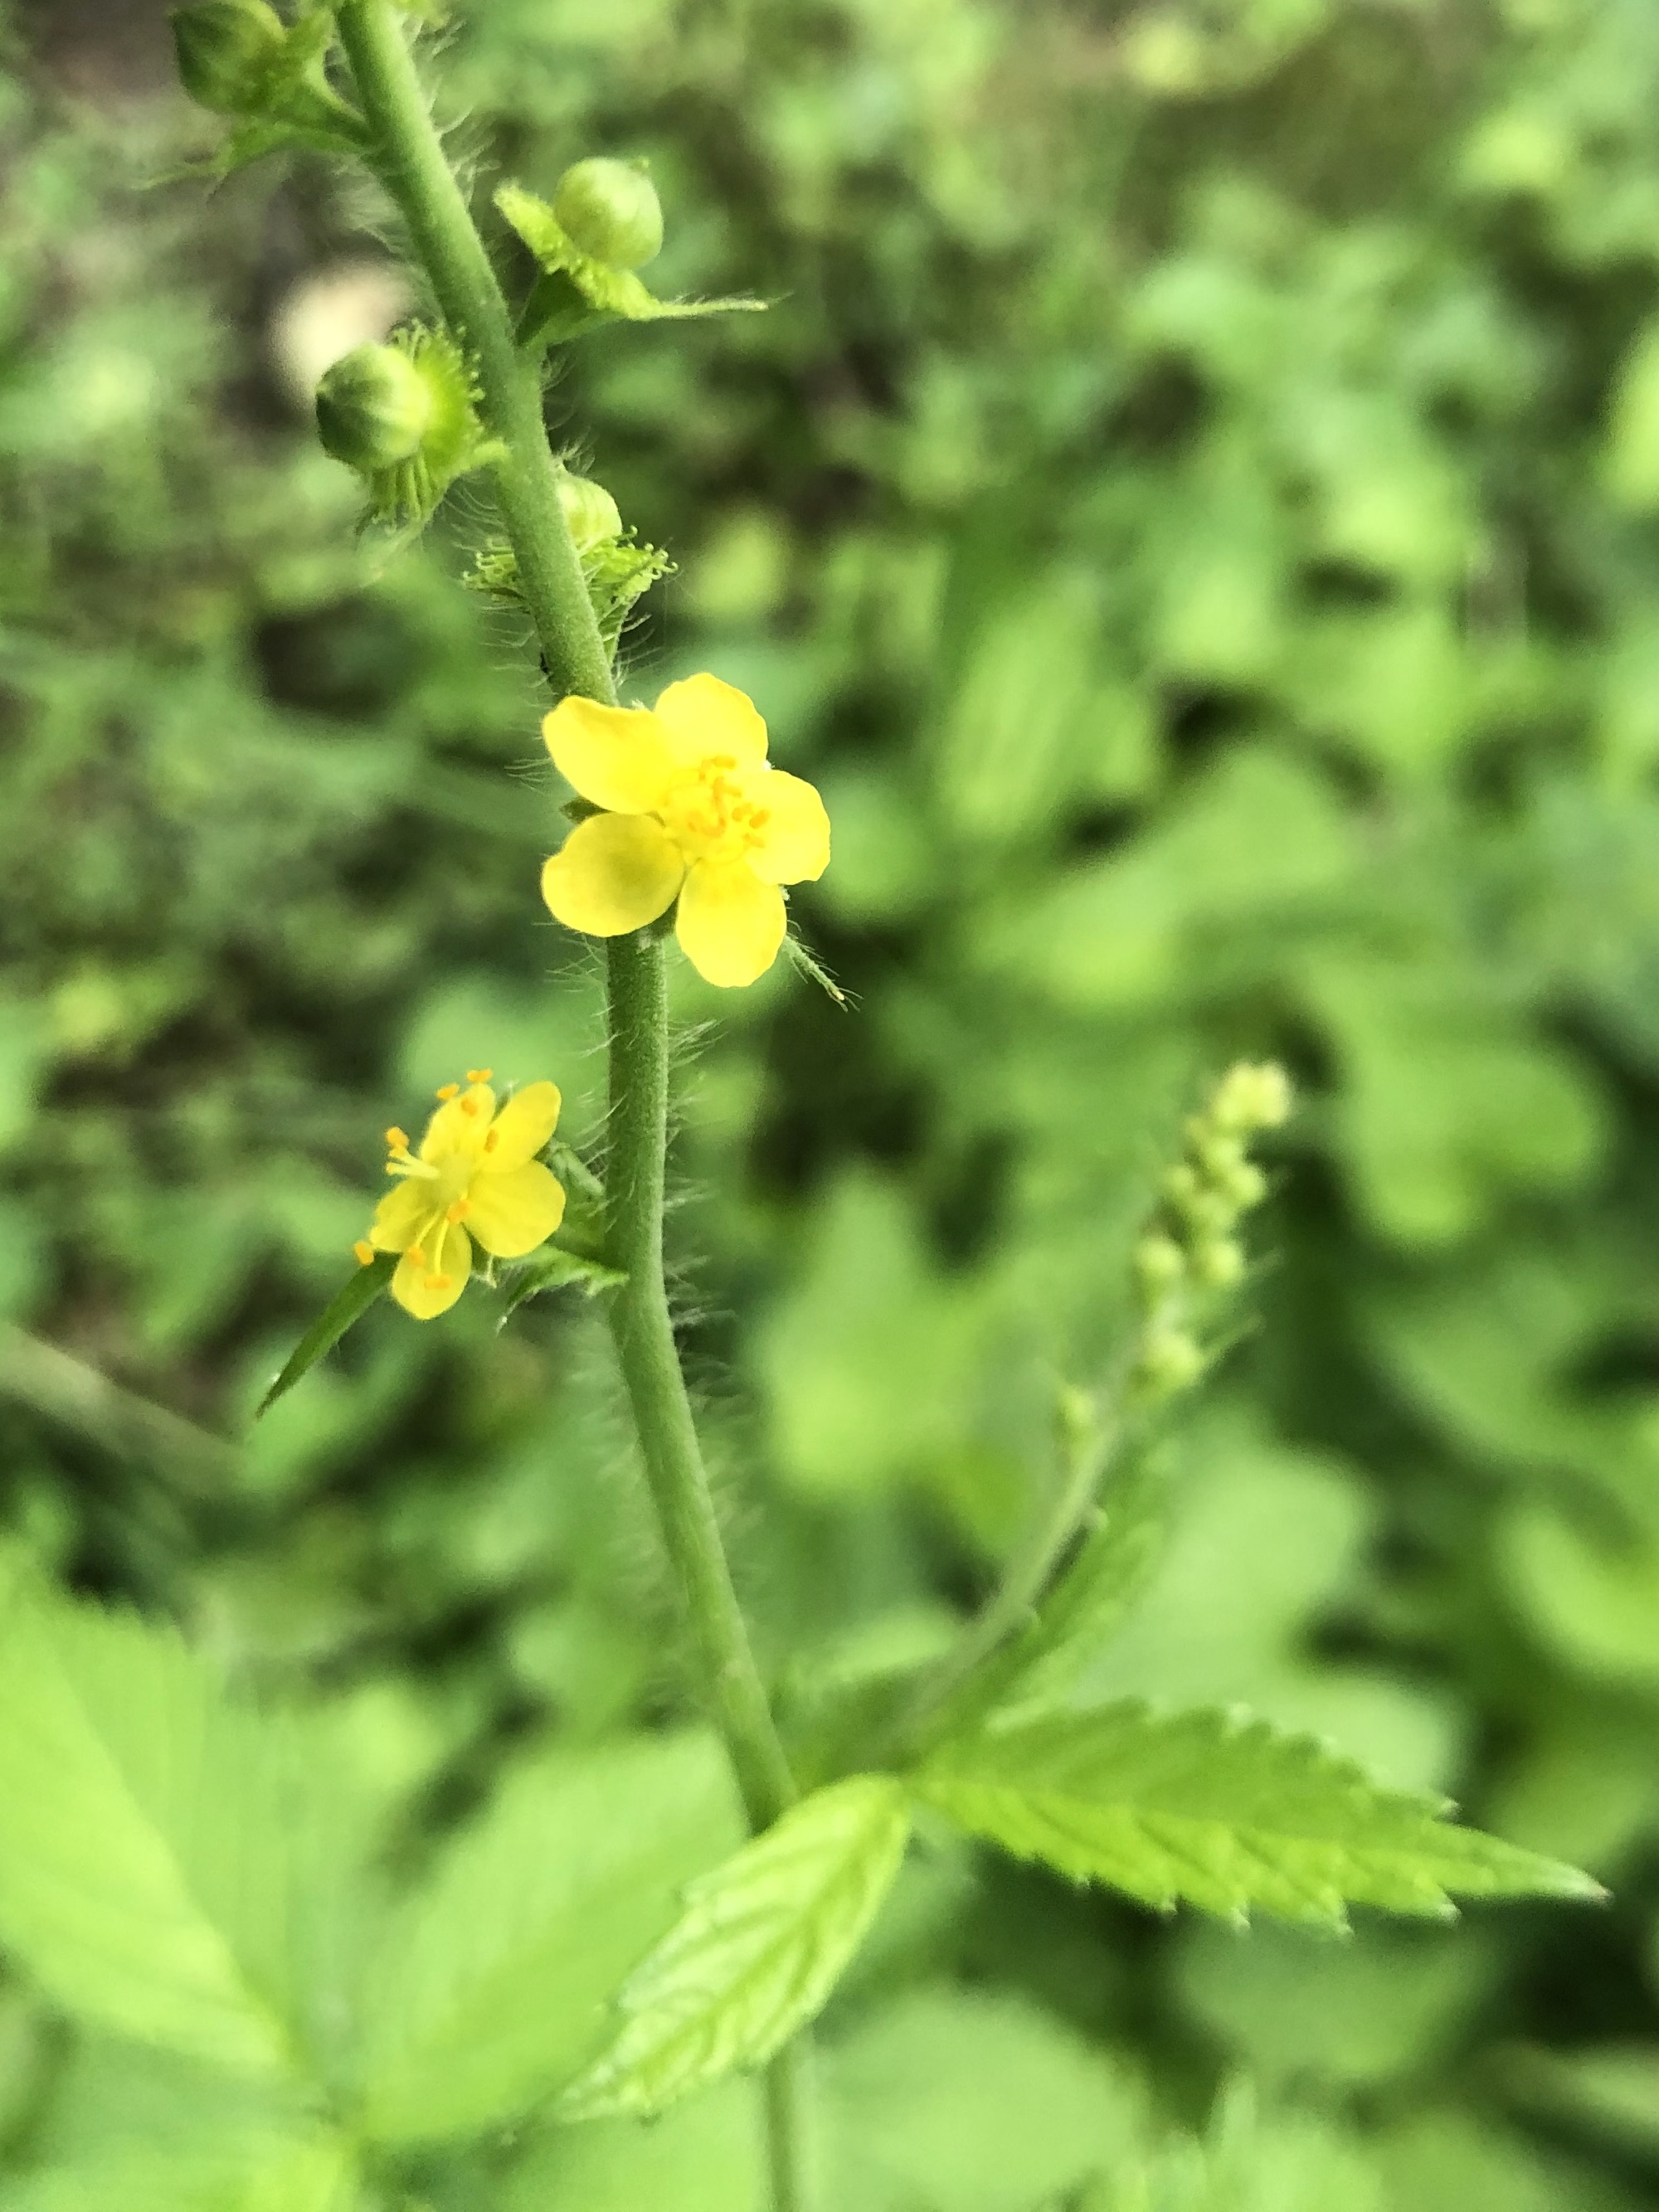 Tall Hairy Agrimony at edge of Nakoma Park natural area in Madison, Wisconsin on July 9, 2022.